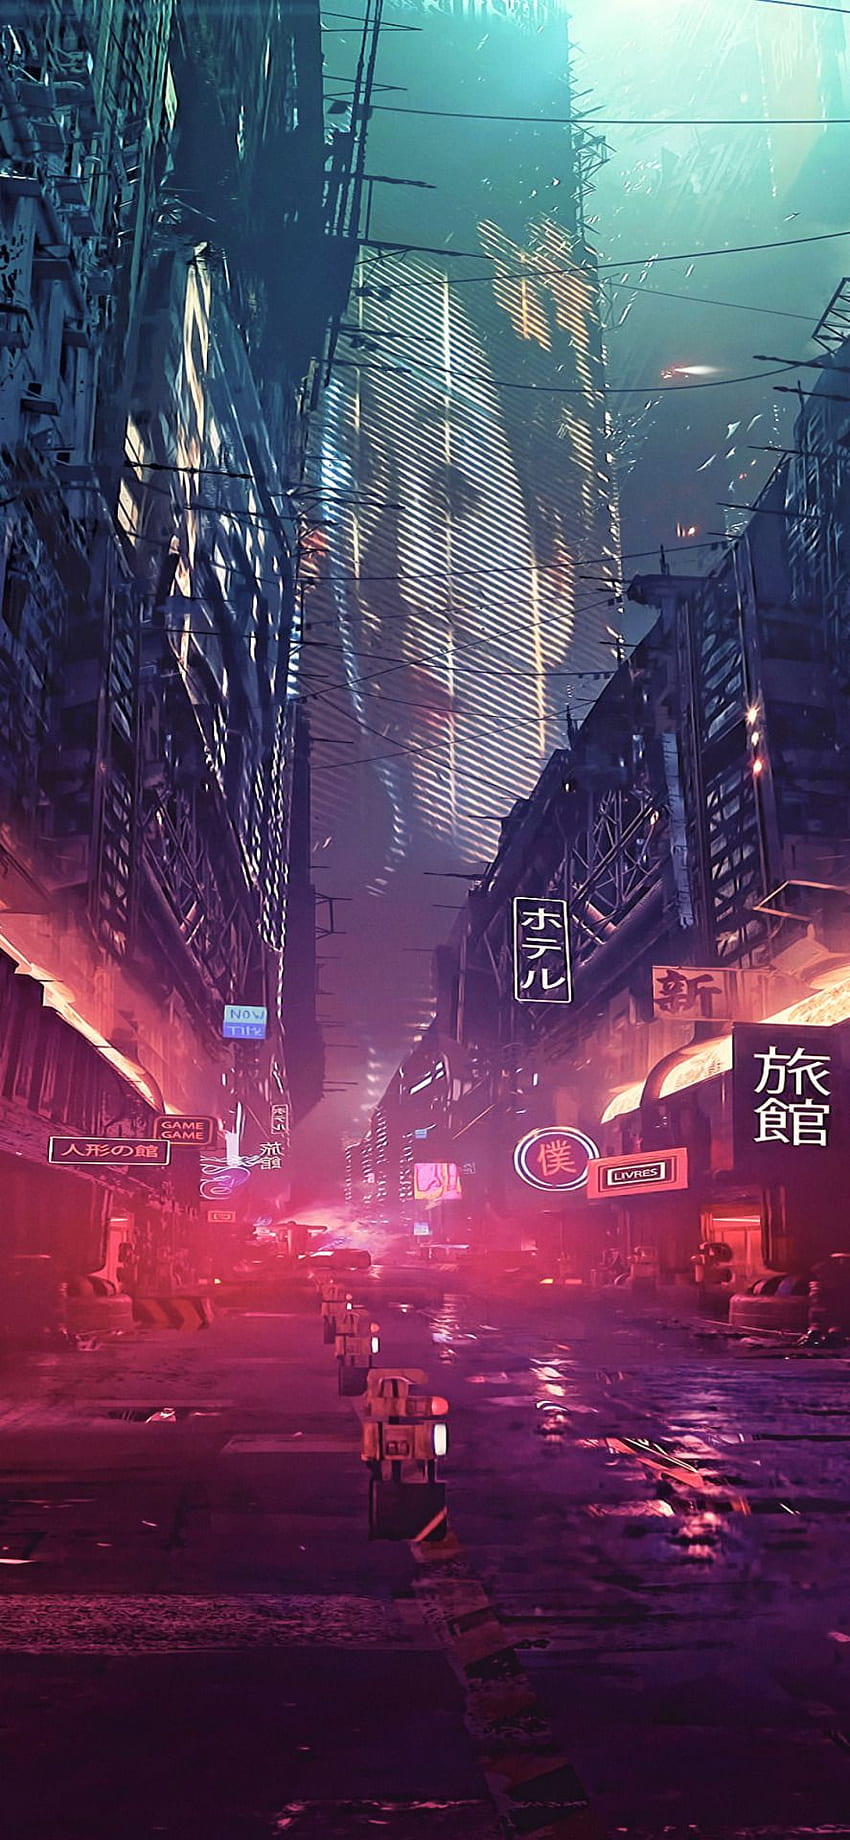 Watanabes Blade Runner Black Out 2022 anime short is almost perfect   TechSpot